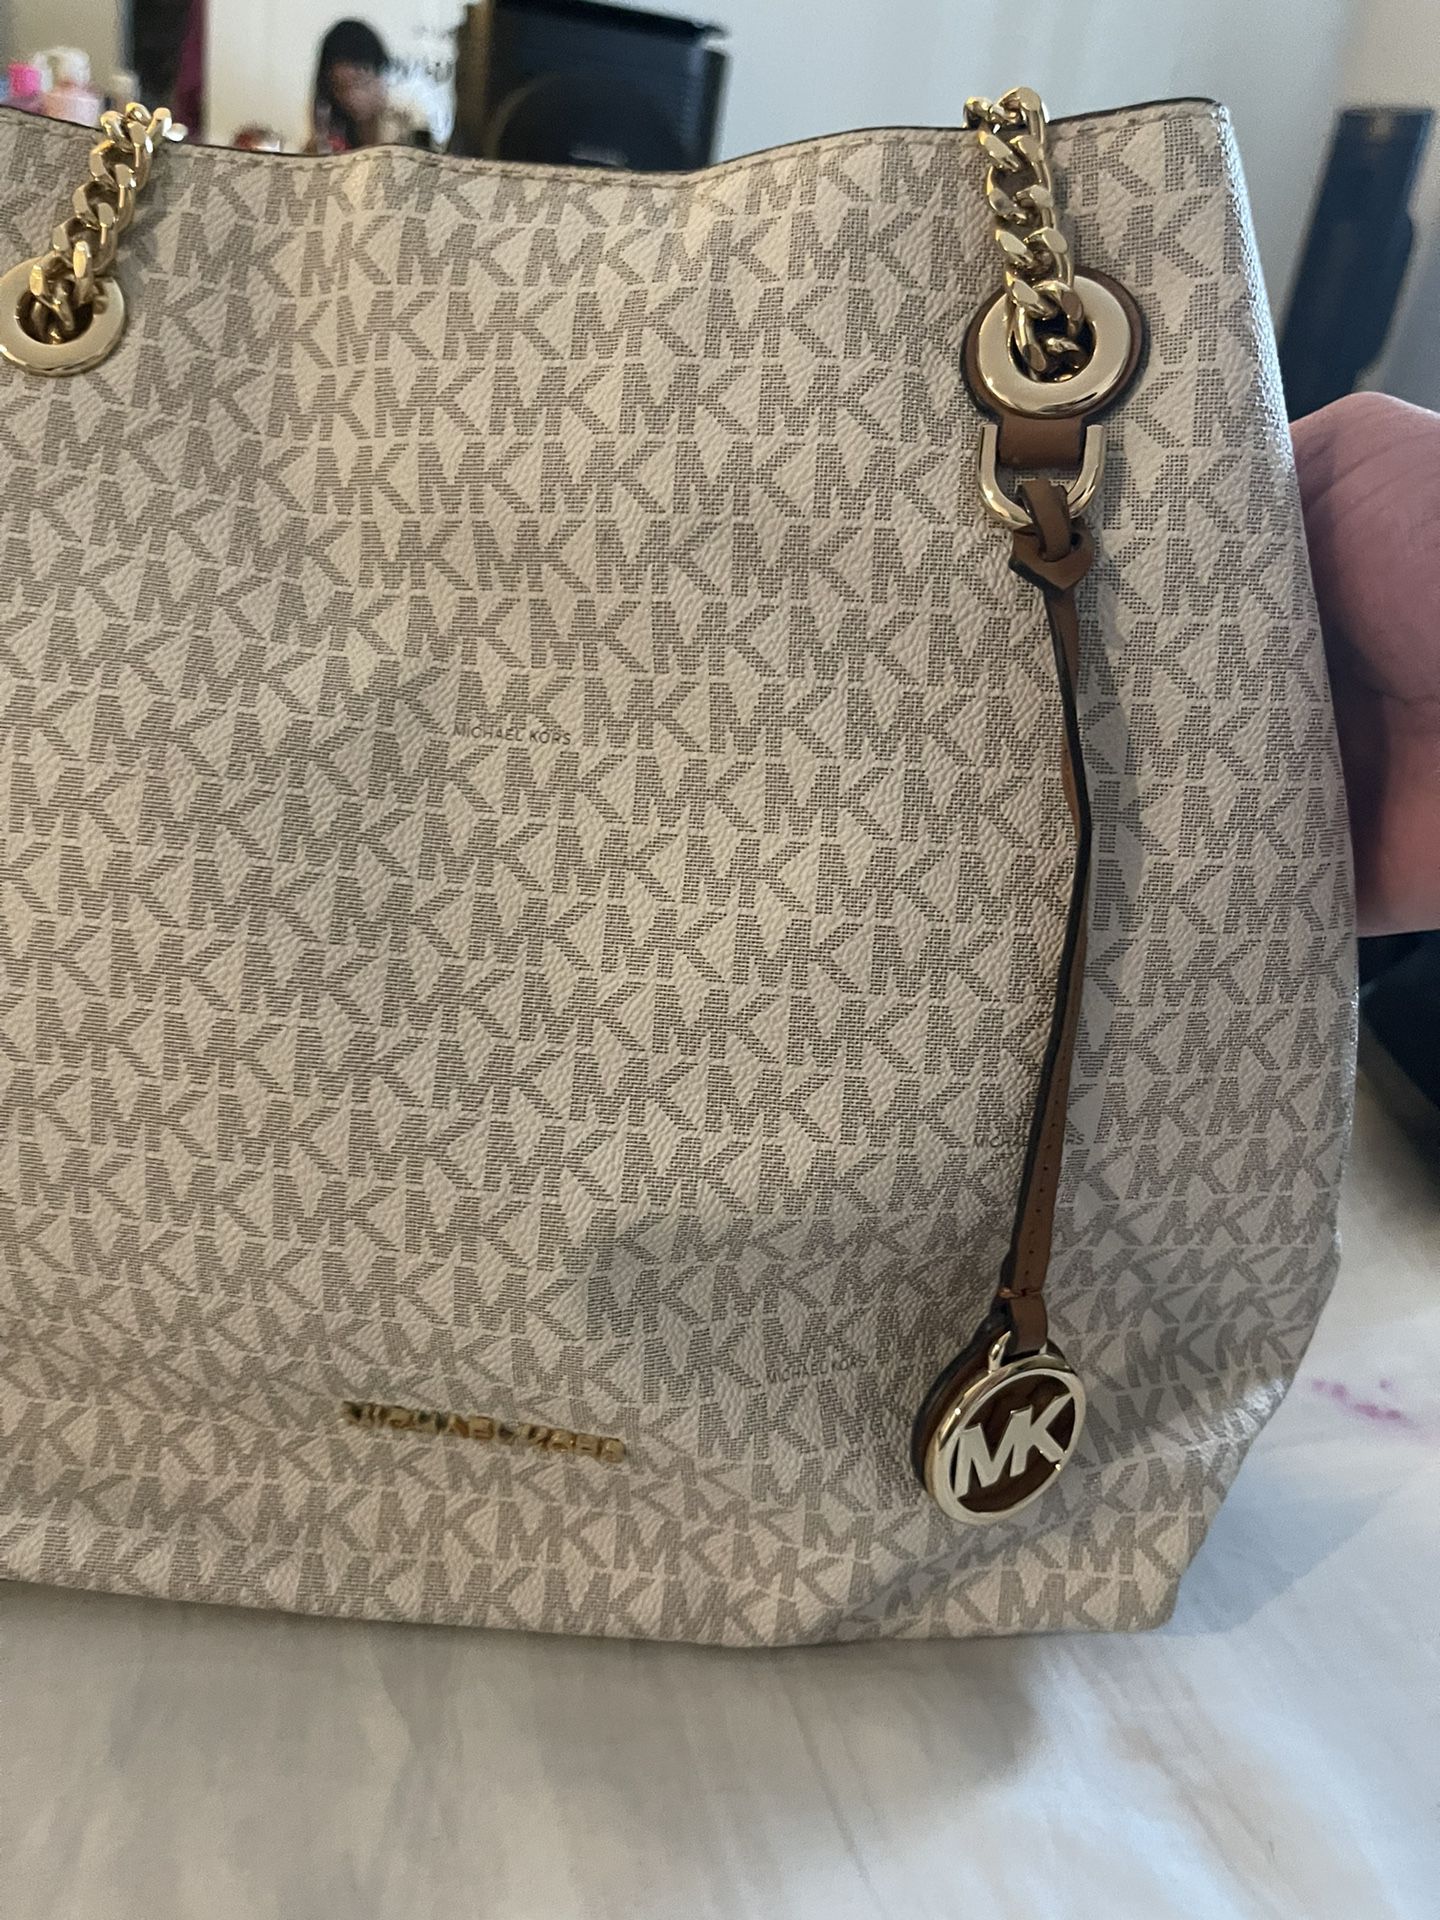 Authentic Michael Kors Large Speedy Bag for Sale in Costa Mesa, CA - OfferUp